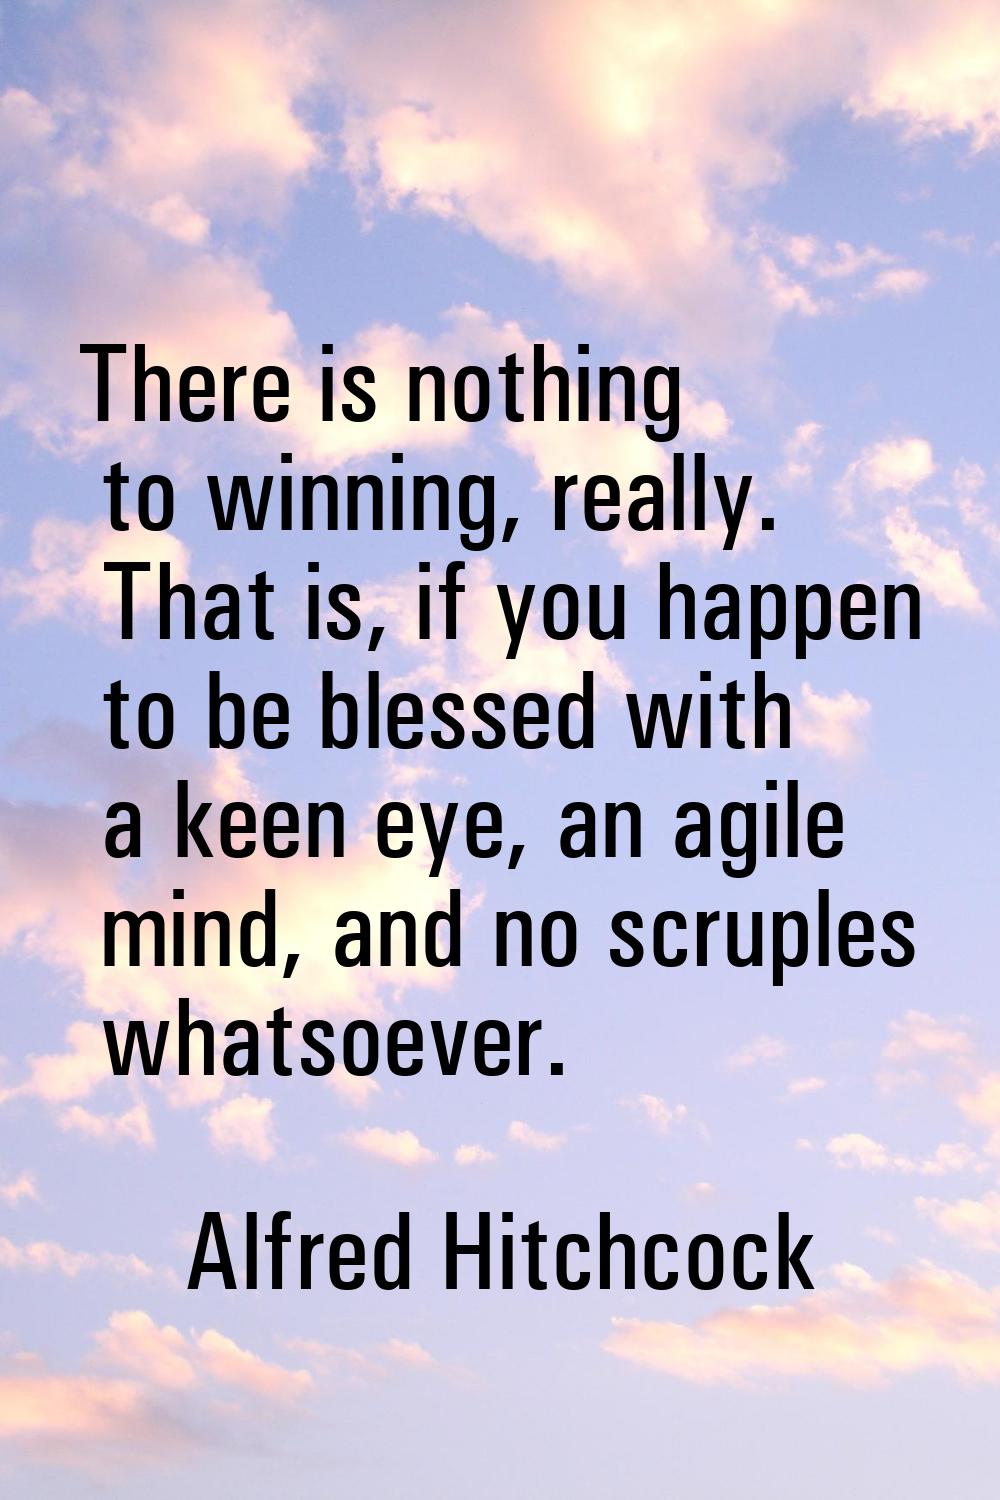 There is nothing to winning, really. That is, if you happen to be blessed with a keen eye, an agile